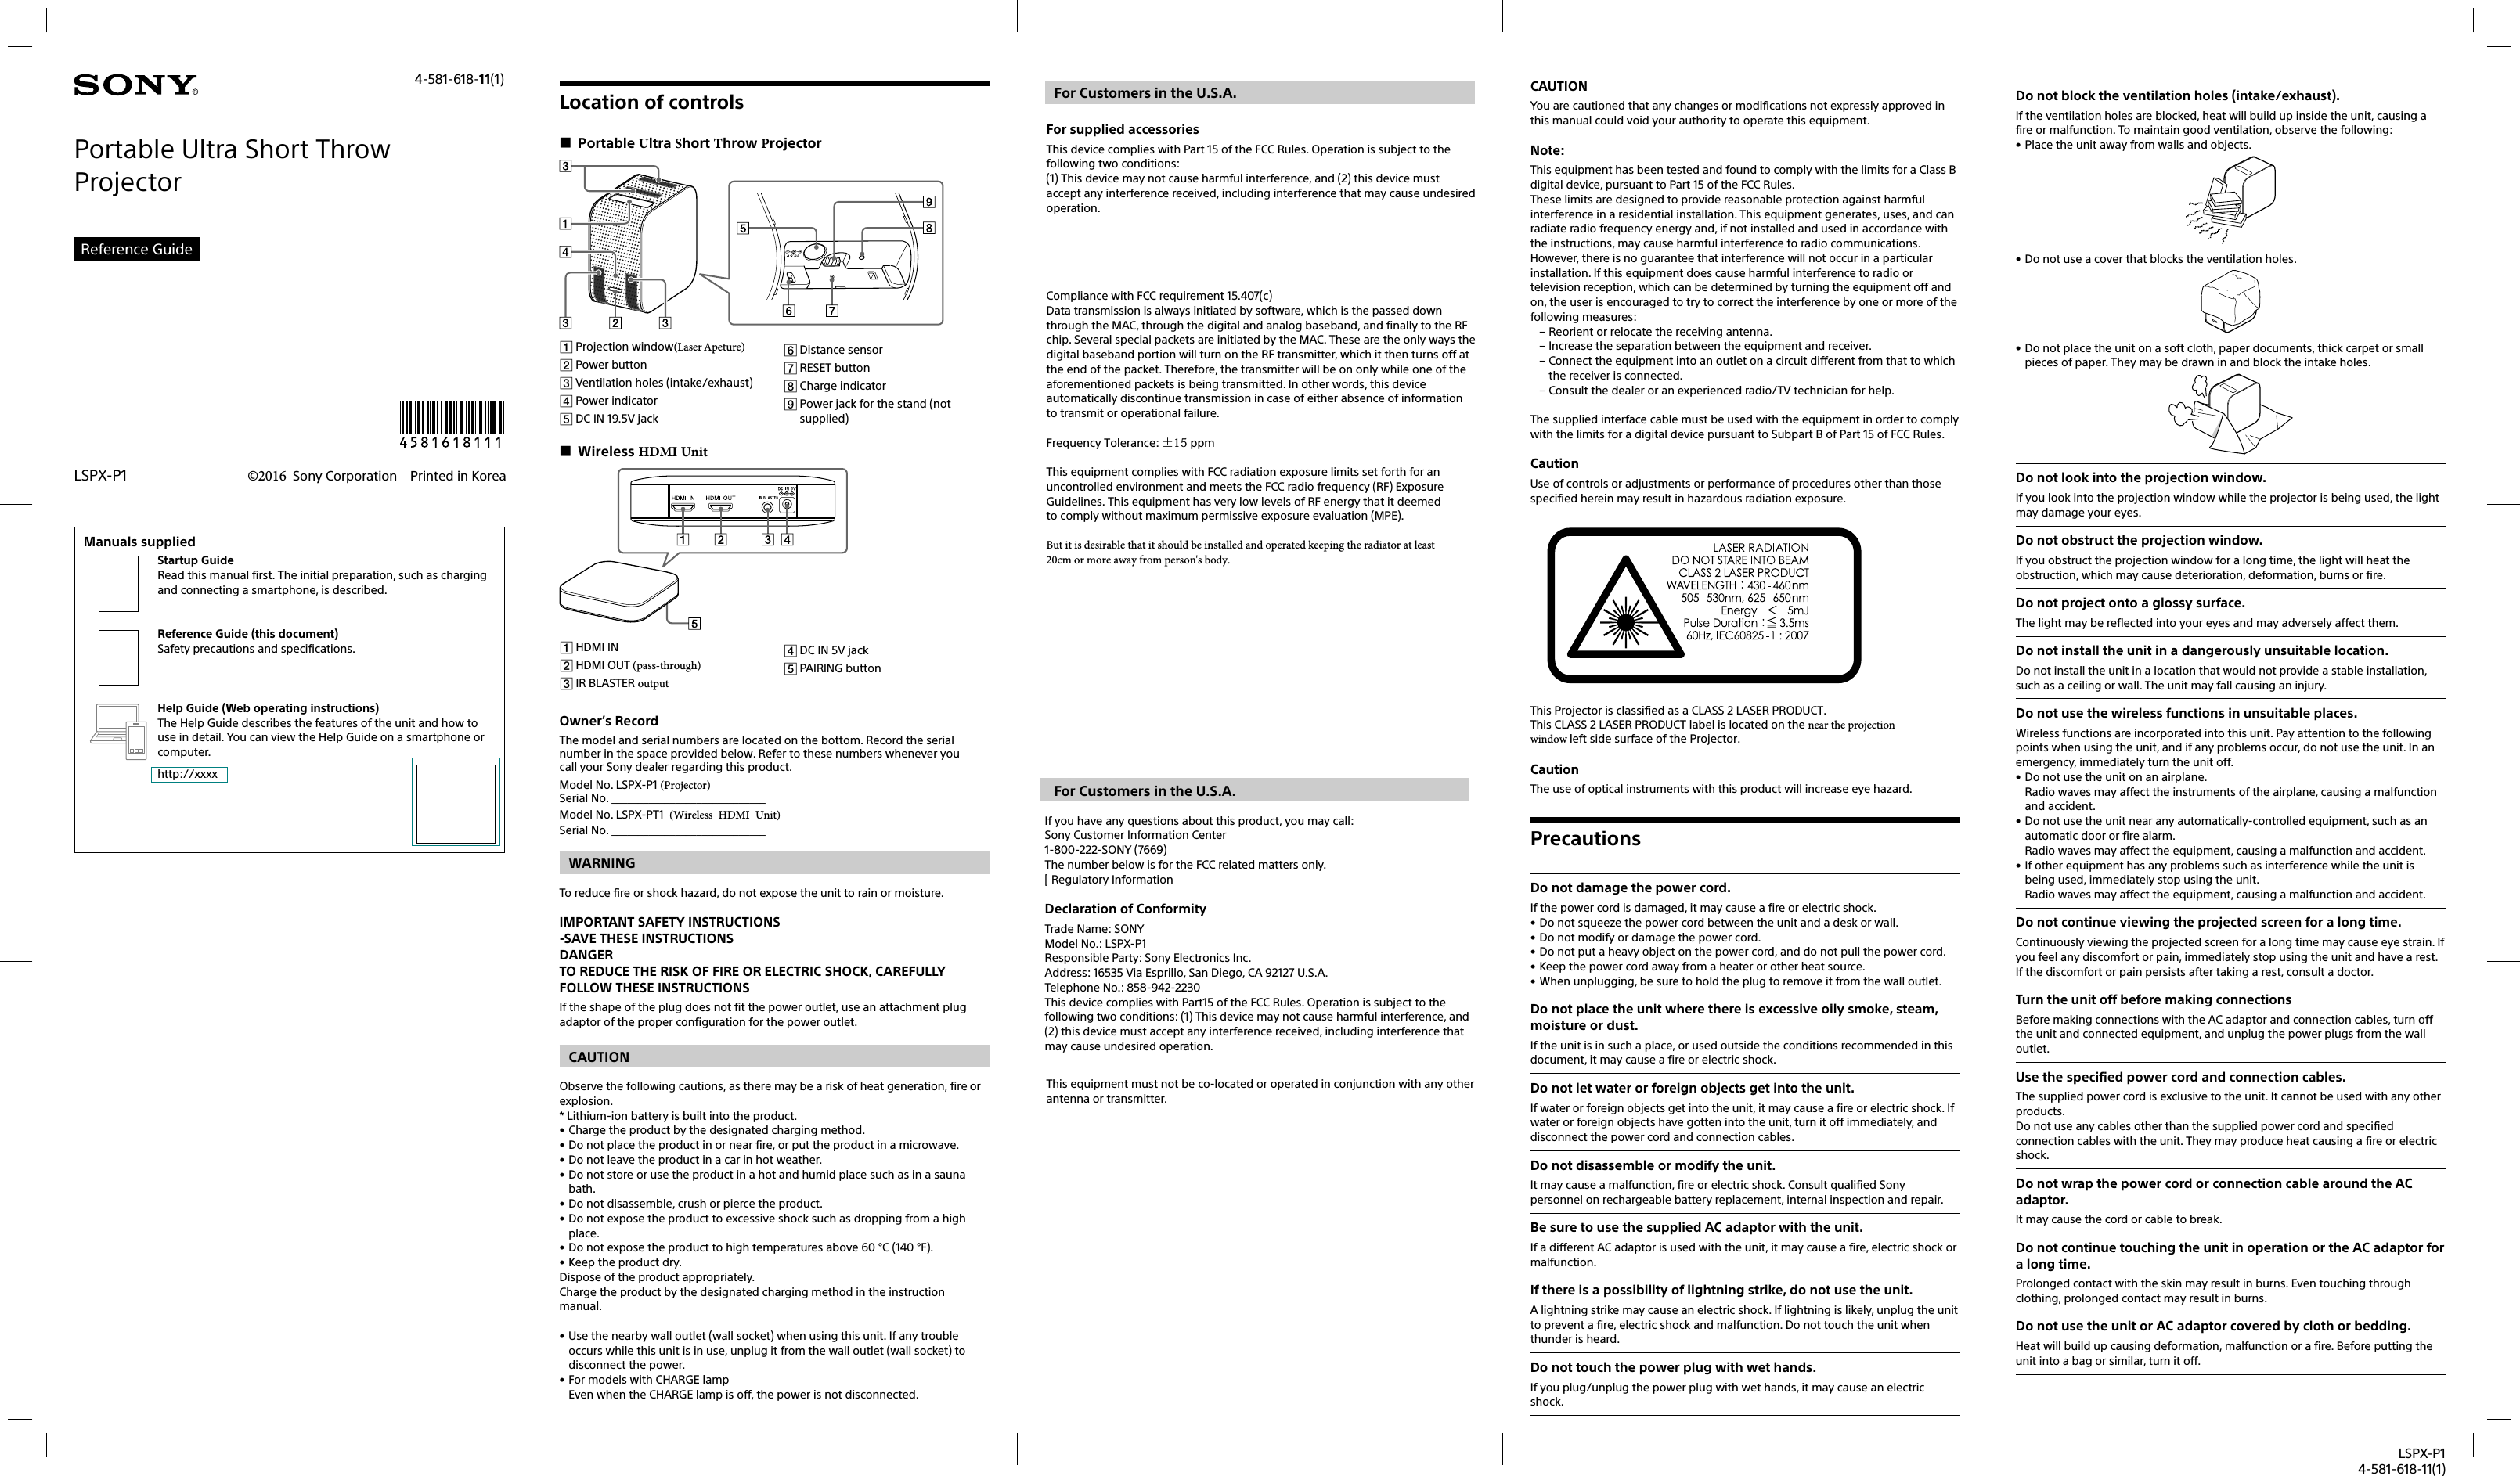 LSPX-P14-581-618-11(1)4-581-618-11(1)Portable Ultra Short Throw ProjectorReference Guide©2016 Sony Corporation Printed in KoreaLSPX-P1Manuals suppliedStartup GuideRead this manual first. The initial preparation, such as charging and connecting a smartphone, is described.Reference Guide (this document)Safety precautions and specifications.Help Guide (Web operating instructions)The Help Guide describes the features of the unit and how to use in detail. You can view the Help Guide on a smartphone or computer.http://xxxxLocation of controls Portable Ultra Short Throw Projector Projection window(Laser Apeture) Power button Ventilation holes (intake/exhaust) Power indicator DC IN 19.5V jack Distance sensor RESET button Charge indicator Power jack for the stand (not supplied) Wireless HDMI Unit HDMI IN  HDMI OUT (pass-through)  IR BLASTER output DC IN 5V jack PAIRING buttonOwner’s RecordThe model and serial numbers are located on the bottom. Record the serial number in the space provided below. Refer to these numbers whenever you call your Sony dealer regarding this product.Model No. LSPX-P1 (Projector)  　Serial No. _____________________________Model No. LSPX-PT1 (Wireless HDMI Unit)Serial No. _____________________________WARNINGTo reduce fire or shock hazard, do not expose the unit to rain or moisture.IMPORTANT SAFETY INSTRUCTIONS-SAVE THESE INSTRUCTIONSDANGERTO REDUCE THE RISK OF FIRE OR ELECTRIC SHOCK, CAREFULLY FOLLOW THESE INSTRUCTIONSIf the shape of the plug does not fit the power outlet, use an attachment plug adaptor of the proper configuration for the power outlet.CAUTIONObserve the following cautions, as there may be a risk of heat generation, fire or explosion.* Lithium-ion battery is built into the product.• Charge the product by the designated charging method.• Do not place the product in or near fire, or put the product in a microwave.• Do not leave the product in a car in hot weather.• Do not store or use the product in a hot and humid place such as in a sauna bath.• Do not disassemble, crush or pierce the product.• Do not expose the product to excessive shock such as dropping from a high place.• Do not expose the product to high temperatures above 60 °C (140 °F).• Keep the product dry.Dispose of the product appropriately.Charge the product by the designated charging method in the instruction manual.• Use the nearby wall outlet (wall socket) when using this unit. If any trouble occurs while this unit is in use, unplug it from the wall outlet (wall socket) to disconnect the power.• For models with CHARGE lampEven when the CHARGE lamp is off, the power is not disconnected.For Customers in the U.S.A. For supplied accessoriesThis device complies with Part 15 of the FCC Rules. Operation is subject to the following two conditions:(1) This device may not cause harmful interference, and (2) this device must accept any interference received, including interference that may cause undesired operation.Compliance with FCC requirement 15.407(c)Data transmission is always initiated by software, which is the passed down through the MAC, through the digital and analog baseband, and finally to the RF chip. Several special packets are initiated by the MAC. These are the only ways the digital baseband portion will turn on the RF transmitter, which it then turns off at the end of the packet. Therefore, the transmitter will be on only while one of the aforementioned packets is being transmitted. In other words, this device automatically discontinue transmission in case of either absence of information to transmit or operational failure.Frequency Tolerance: ±15 ppmThis equipment complies with FCC radiation exposure limits set forth for an uncontrolled environment and meets the FCC radio frequency (RF) Exposure Guidelines. This equipment has very low levels of RF energy that it deemed to comply without maximum permissive exposure evaluation (MPE). But it is desirable that it should be installed and operated keeping the radiator at least 20cm or more away from person&apos;s body.For Customers in the U.S.A.If you have any questions about this product, you may call:Sony Customer Information Center1-800-222-SONY (7669)The number below is for the FCC related matters only.[ Regulatory InformationDeclaration of ConformityTrade Name: SONYModel No.: LSPX-P1Responsible Party: Sony Electronics Inc.Address: 16535 Via Esprillo, San Diego, CA 92127 U.S.A.Telephone No.: 858-942-2230This device complies with Part15 of the FCC Rules. Operation is subject to the following two conditions: (1) This device may not cause harmful interference, and (2) this device must accept any interference received, including interference that may cause undesired operation.This equipment must not be co-located or operated in conjunction with any other antenna or transmitter.CAUTIONYou are cautioned that any changes or modifications not expressly approved in this manual could void your authority to operate this equipment.Note:This equipment has been tested and found to comply with the limits for a Class B digital device, pursuant to Part 15 of the FCC Rules.These limits are designed to provide reasonable protection against harmful interference in a residential installation. This equipment generates, uses, and can radiate radio frequency energy and, if not installed and used in accordance with the instructions, may cause harmful interference to radio communications. However, there is no guarantee that interference will not occur in a particular installation. If this equipment does cause harmful interference to radio or television reception, which can be determined by turning the equipment off and on, the user is encouraged to try to correct the interference by one or more of the following measures:– Reorient or relocate the receiving antenna.– Increase the separation between the equipment and receiver.– Connect the equipment into an outlet on a circuit different from that to which the receiver is connected.– Consult the dealer or an experienced radio/TV technician for help.The supplied interface cable must be used with the equipment in order to comply with the limits for a digital device pursuant to Subpart B of Part 15 of FCC Rules.CautionUse of controls or adjustments or performance of procedures other than those specified herein may result in hazardous radiation exposure.This Projector is classified as a CLASS 2 LASER PRODUCT.This CLASS 2 LASER PRODUCT label is located on the near the projection window left side surface of the Projector.CautionThe use of optical instruments with this product will increase eye hazard.PrecautionsDo not damage the power cord.If the power cord is damaged, it may cause a fire or electric shock.• Do not squeeze the power cord between the unit and a desk or wall.• Do not modify or damage the power cord.• Do not put a heavy object on the power cord, and do not pull the power cord.• Keep the power cord away from a heater or other heat source.• When unplugging, be sure to hold the plug to remove it from the wall outlet.Do not place the unit where there is excessive oily smoke, steam, moisture or dust.If the unit is in such a place, or used outside the conditions recommended in this document, it may cause a fire or electric shock.Do not let water or foreign objects get into the unit.If water or foreign objects get into the unit, it may cause a fire or electric shock. If water or foreign objects have gotten into the unit, turn it off immediately, and disconnect the power cord and connection cables.Do not disassemble or modify the unit.It may cause a malfunction, fire or electric shock. Consult qualified Sony personnel on rechargeable battery replacement, internal inspection and repair.Be sure to use the supplied AC adaptor with the unit.If a different AC adaptor is used with the unit, it may cause a fire, electric shock or malfunction.If there is a possibility of lightning strike, do not use the unit.A lightning strike may cause an electric shock. If lightning is likely, unplug the unit to prevent a fire, electric shock and malfunction. Do not touch the unit when thunder is heard.Do not touch the power plug with wet hands.If you plug/unplug the power plug with wet hands, it may cause an electric shock.Do not block the ventilation holes (intake/exhaust).If the ventilation holes are blocked, heat will build up inside the unit, causing a fire or malfunction. To maintain good ventilation, observe the following:• Place the unit away from walls and objects.• Do not use a cover that blocks the ventilation holes.• Do not place the unit on a soft cloth, paper documents, thick carpet or small pieces of paper. They may be drawn in and block the intake holes.Do not look into the projection window.If you look into the projection window while the projector is being used, the light may damage your eyes.Do not obstruct the projection window.If you obstruct the projection window for a long time, the light will heat the obstruction, which may cause deterioration, deformation, burns or fire.Do not project onto a glossy surface.The light may be reflected into your eyes and may adversely affect them.Do not install the unit in a dangerously unsuitable location.Do not install the unit in a location that would not provide a stable installation, such as a ceiling or wall. The unit may fall causing an injury.Do not use the wireless functions in unsuitable places.Wireless functions are incorporated into this unit. Pay attention to the following points when using the unit, and if any problems occur, do not use the unit. In an emergency, immediately turn the unit off.• Do not use the unit on an airplane.Radio waves may affect the instruments of the airplane, causing a malfunction and accident.• Do not use the unit near any automatically-controlled equipment, such as an automatic door or fire alarm.Radio waves may affect the equipment, causing a malfunction and accident.• If other equipment has any problems such as interference while the unit is being used, immediately stop using the unit.Radio waves may affect the equipment, causing a malfunction and accident.Do not continue viewing the projected screen for a long time.Continuously viewing the projected screen for a long time may cause eye strain. If you feel any discomfort or pain, immediately stop using the unit and have a rest. If the discomfort or pain persists after taking a rest, consult a doctor.Turn the unit off before making connectionsBefore making connections with the AC adaptor and connection cables, turn off the unit and connected equipment, and unplug the power plugs from the wall outlet.Use the specified power cord and connection cables.The supplied power cord is exclusive to the unit. It cannot be used with any other products.Do not use any cables other than the supplied power cord and specified connection cables with the unit. They may produce heat causing a fire or electric shock.Do not wrap the power cord or connection cable around the AC adaptor.It may cause the cord or cable to break.Do not continue touching the unit in operation or the AC adaptor for a long time.Prolonged contact with the skin may result in burns. Even touching through clothing, prolonged contact may result in burns.Do not use the unit or AC adaptor covered by cloth or bedding.Heat will build up causing deformation, malfunction or a fire. Before putting the unit into a bag or similar, turn it off.